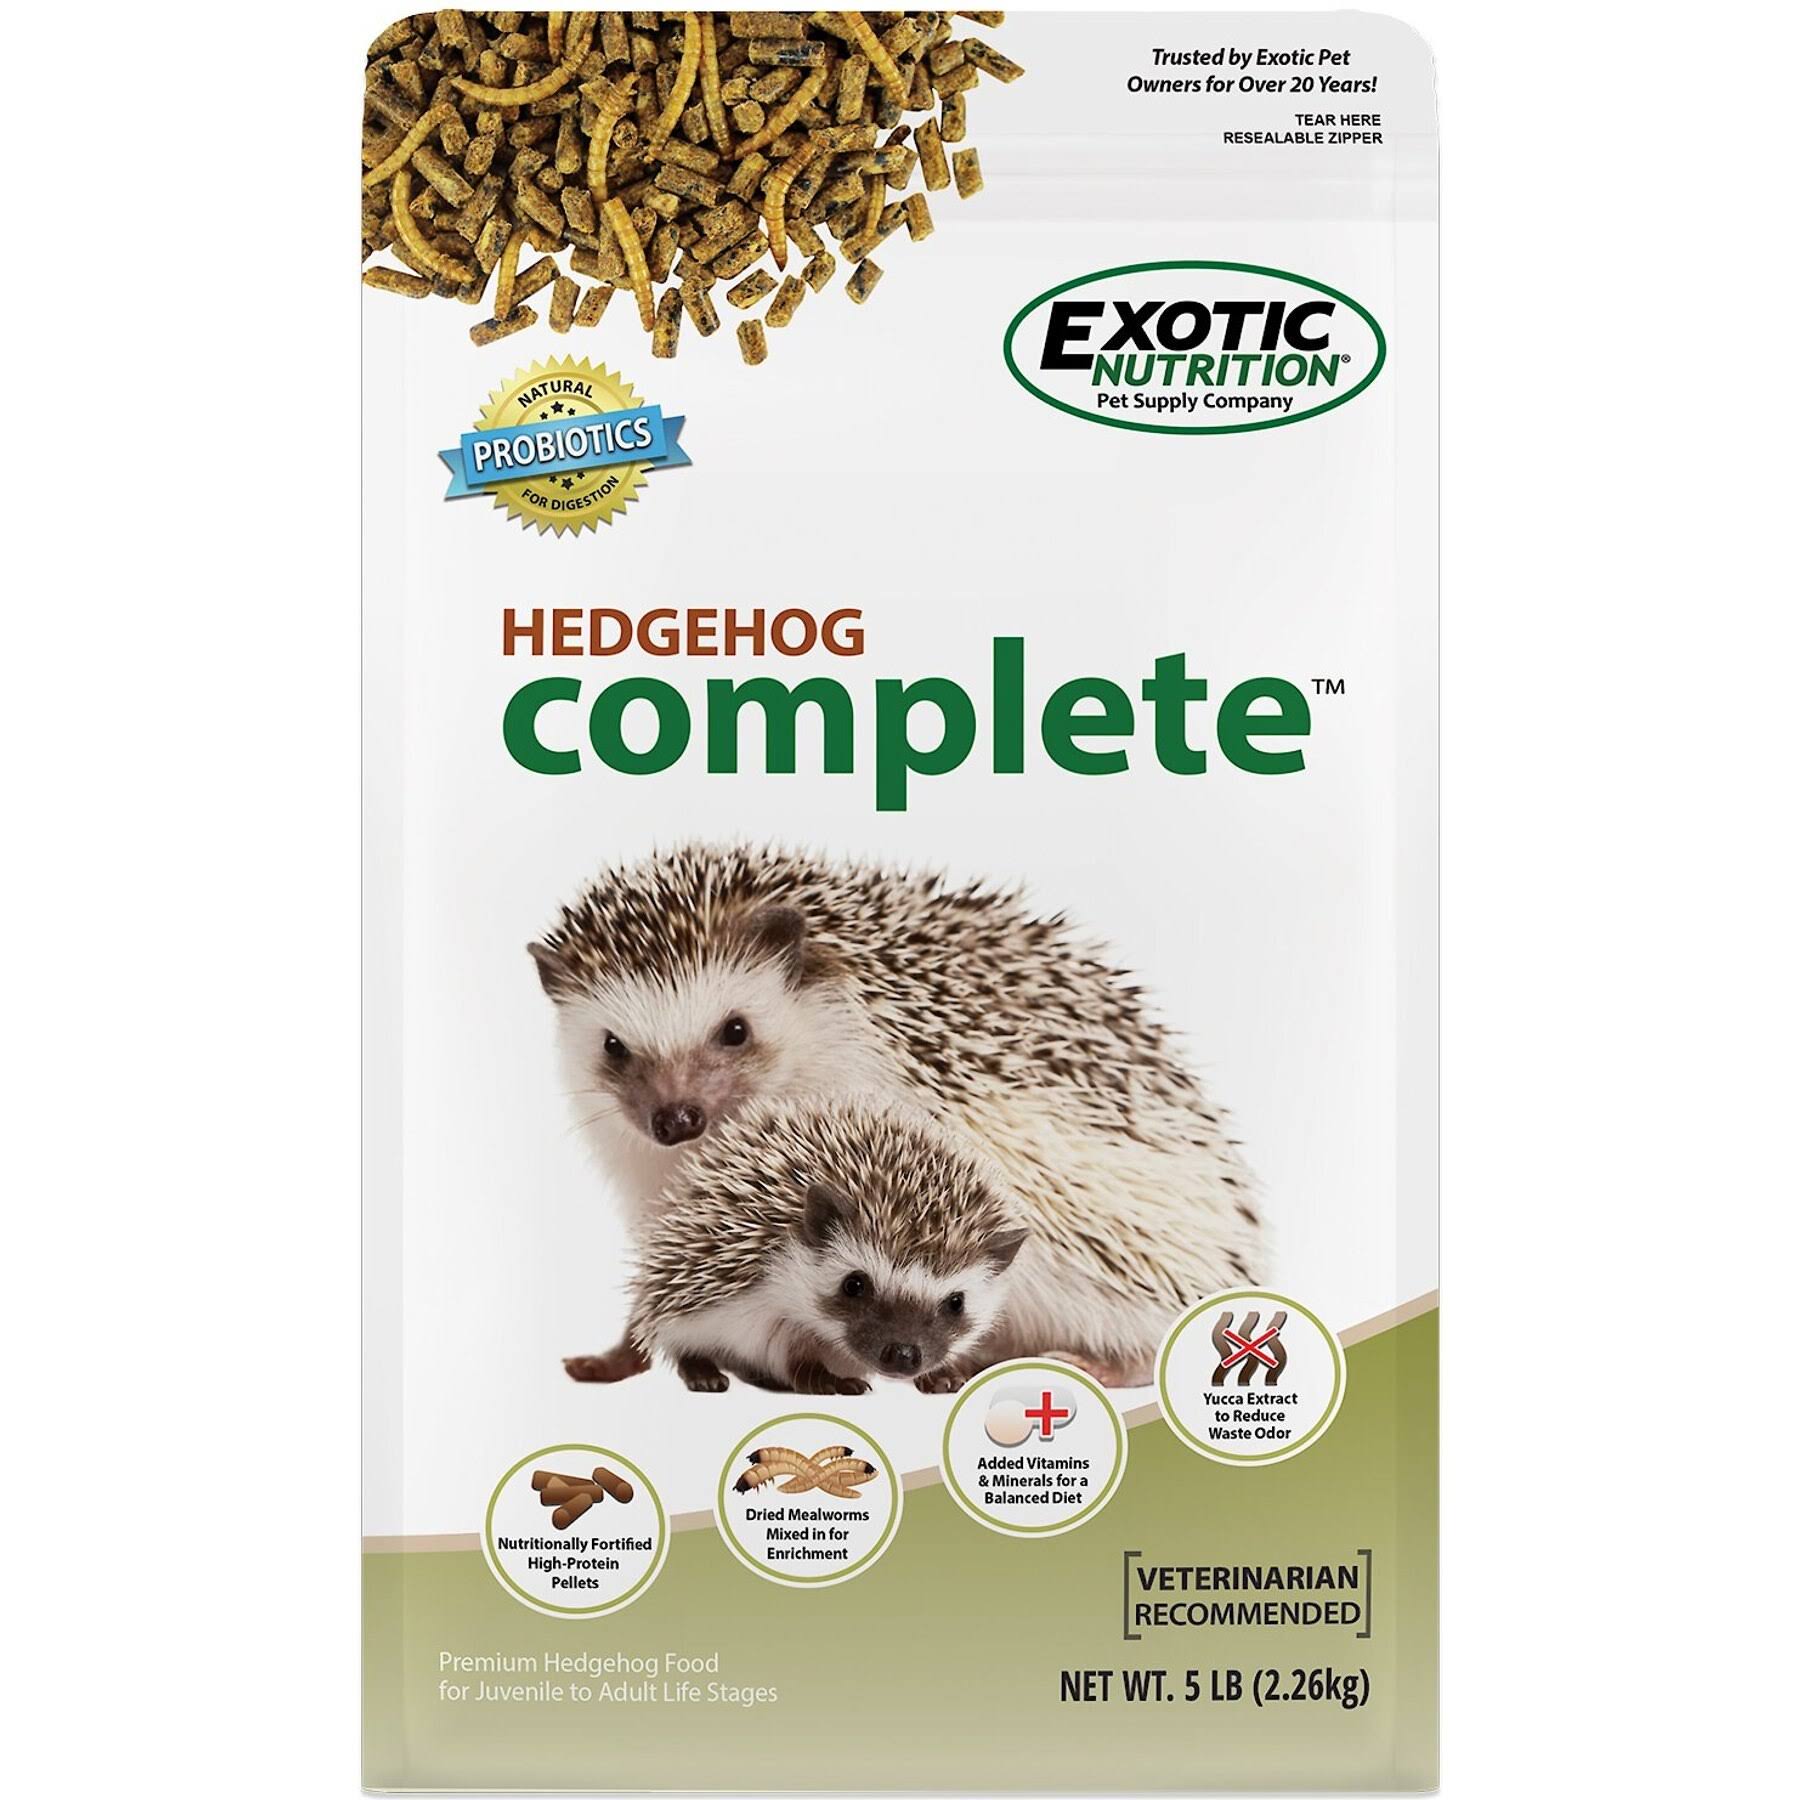 Exotic Nutrition Hedgehog Complete - Nutritionally Complete Natural Healthy High Protein Pellets & Dried Mealworms - Food For Pet Hedgehogs